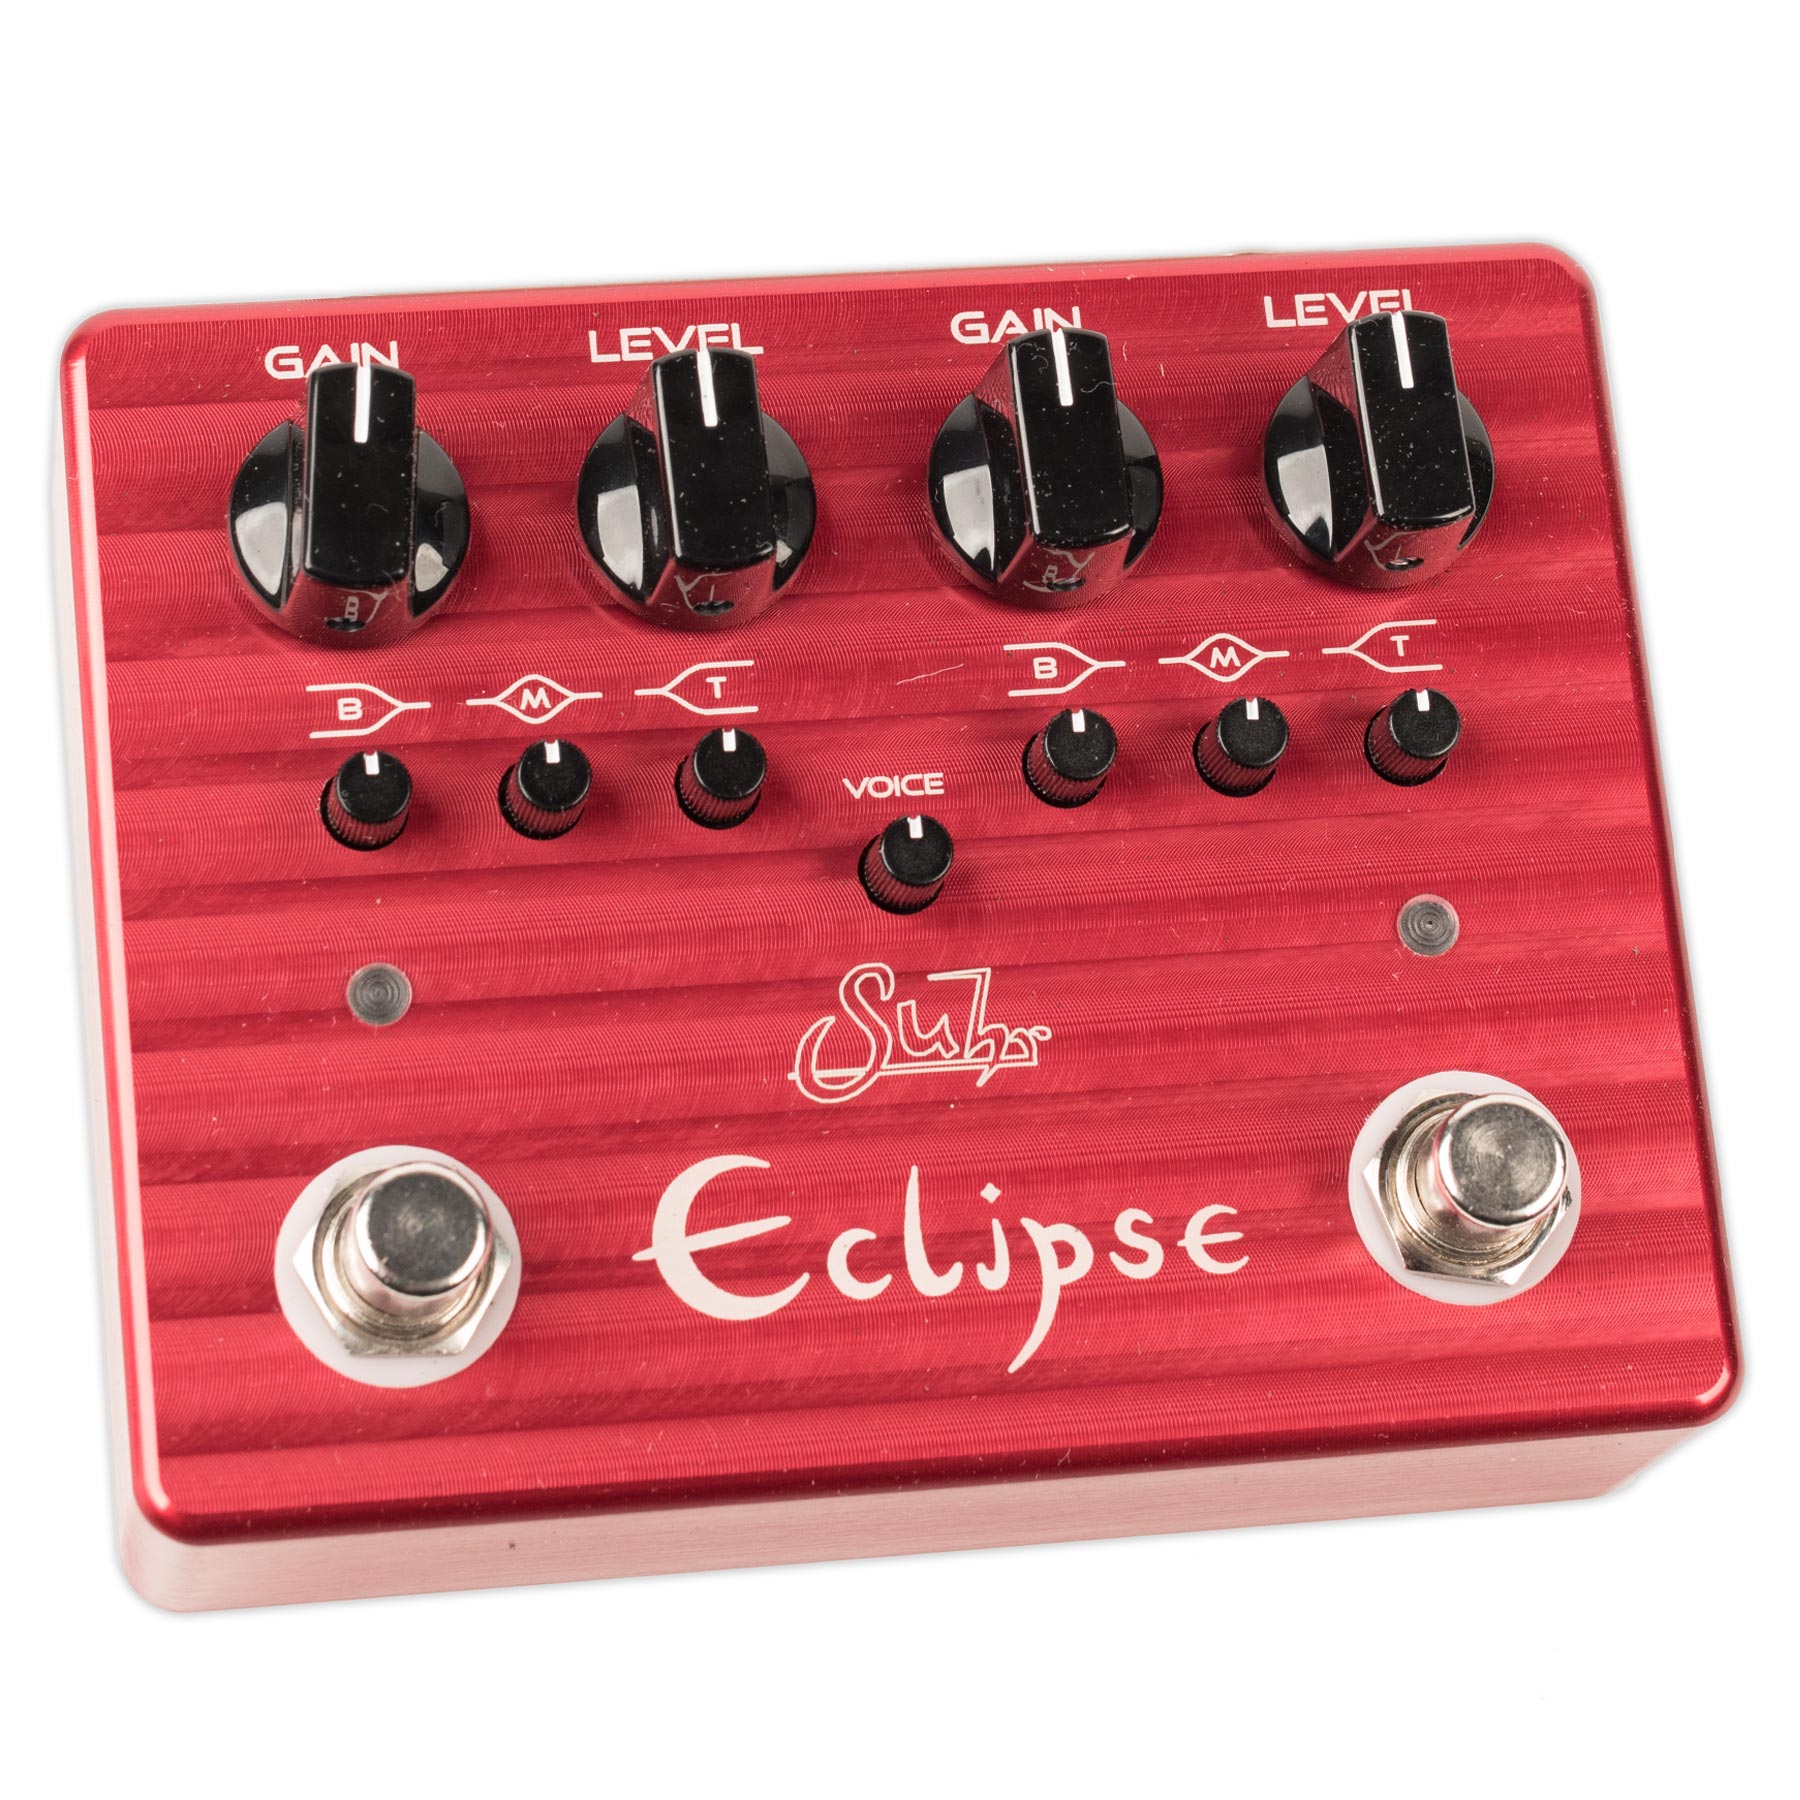 SUHR ECLIPSE DUAL CHANNEL OVERDRIVE/DISTORTION PEDAL | Stang Guitars